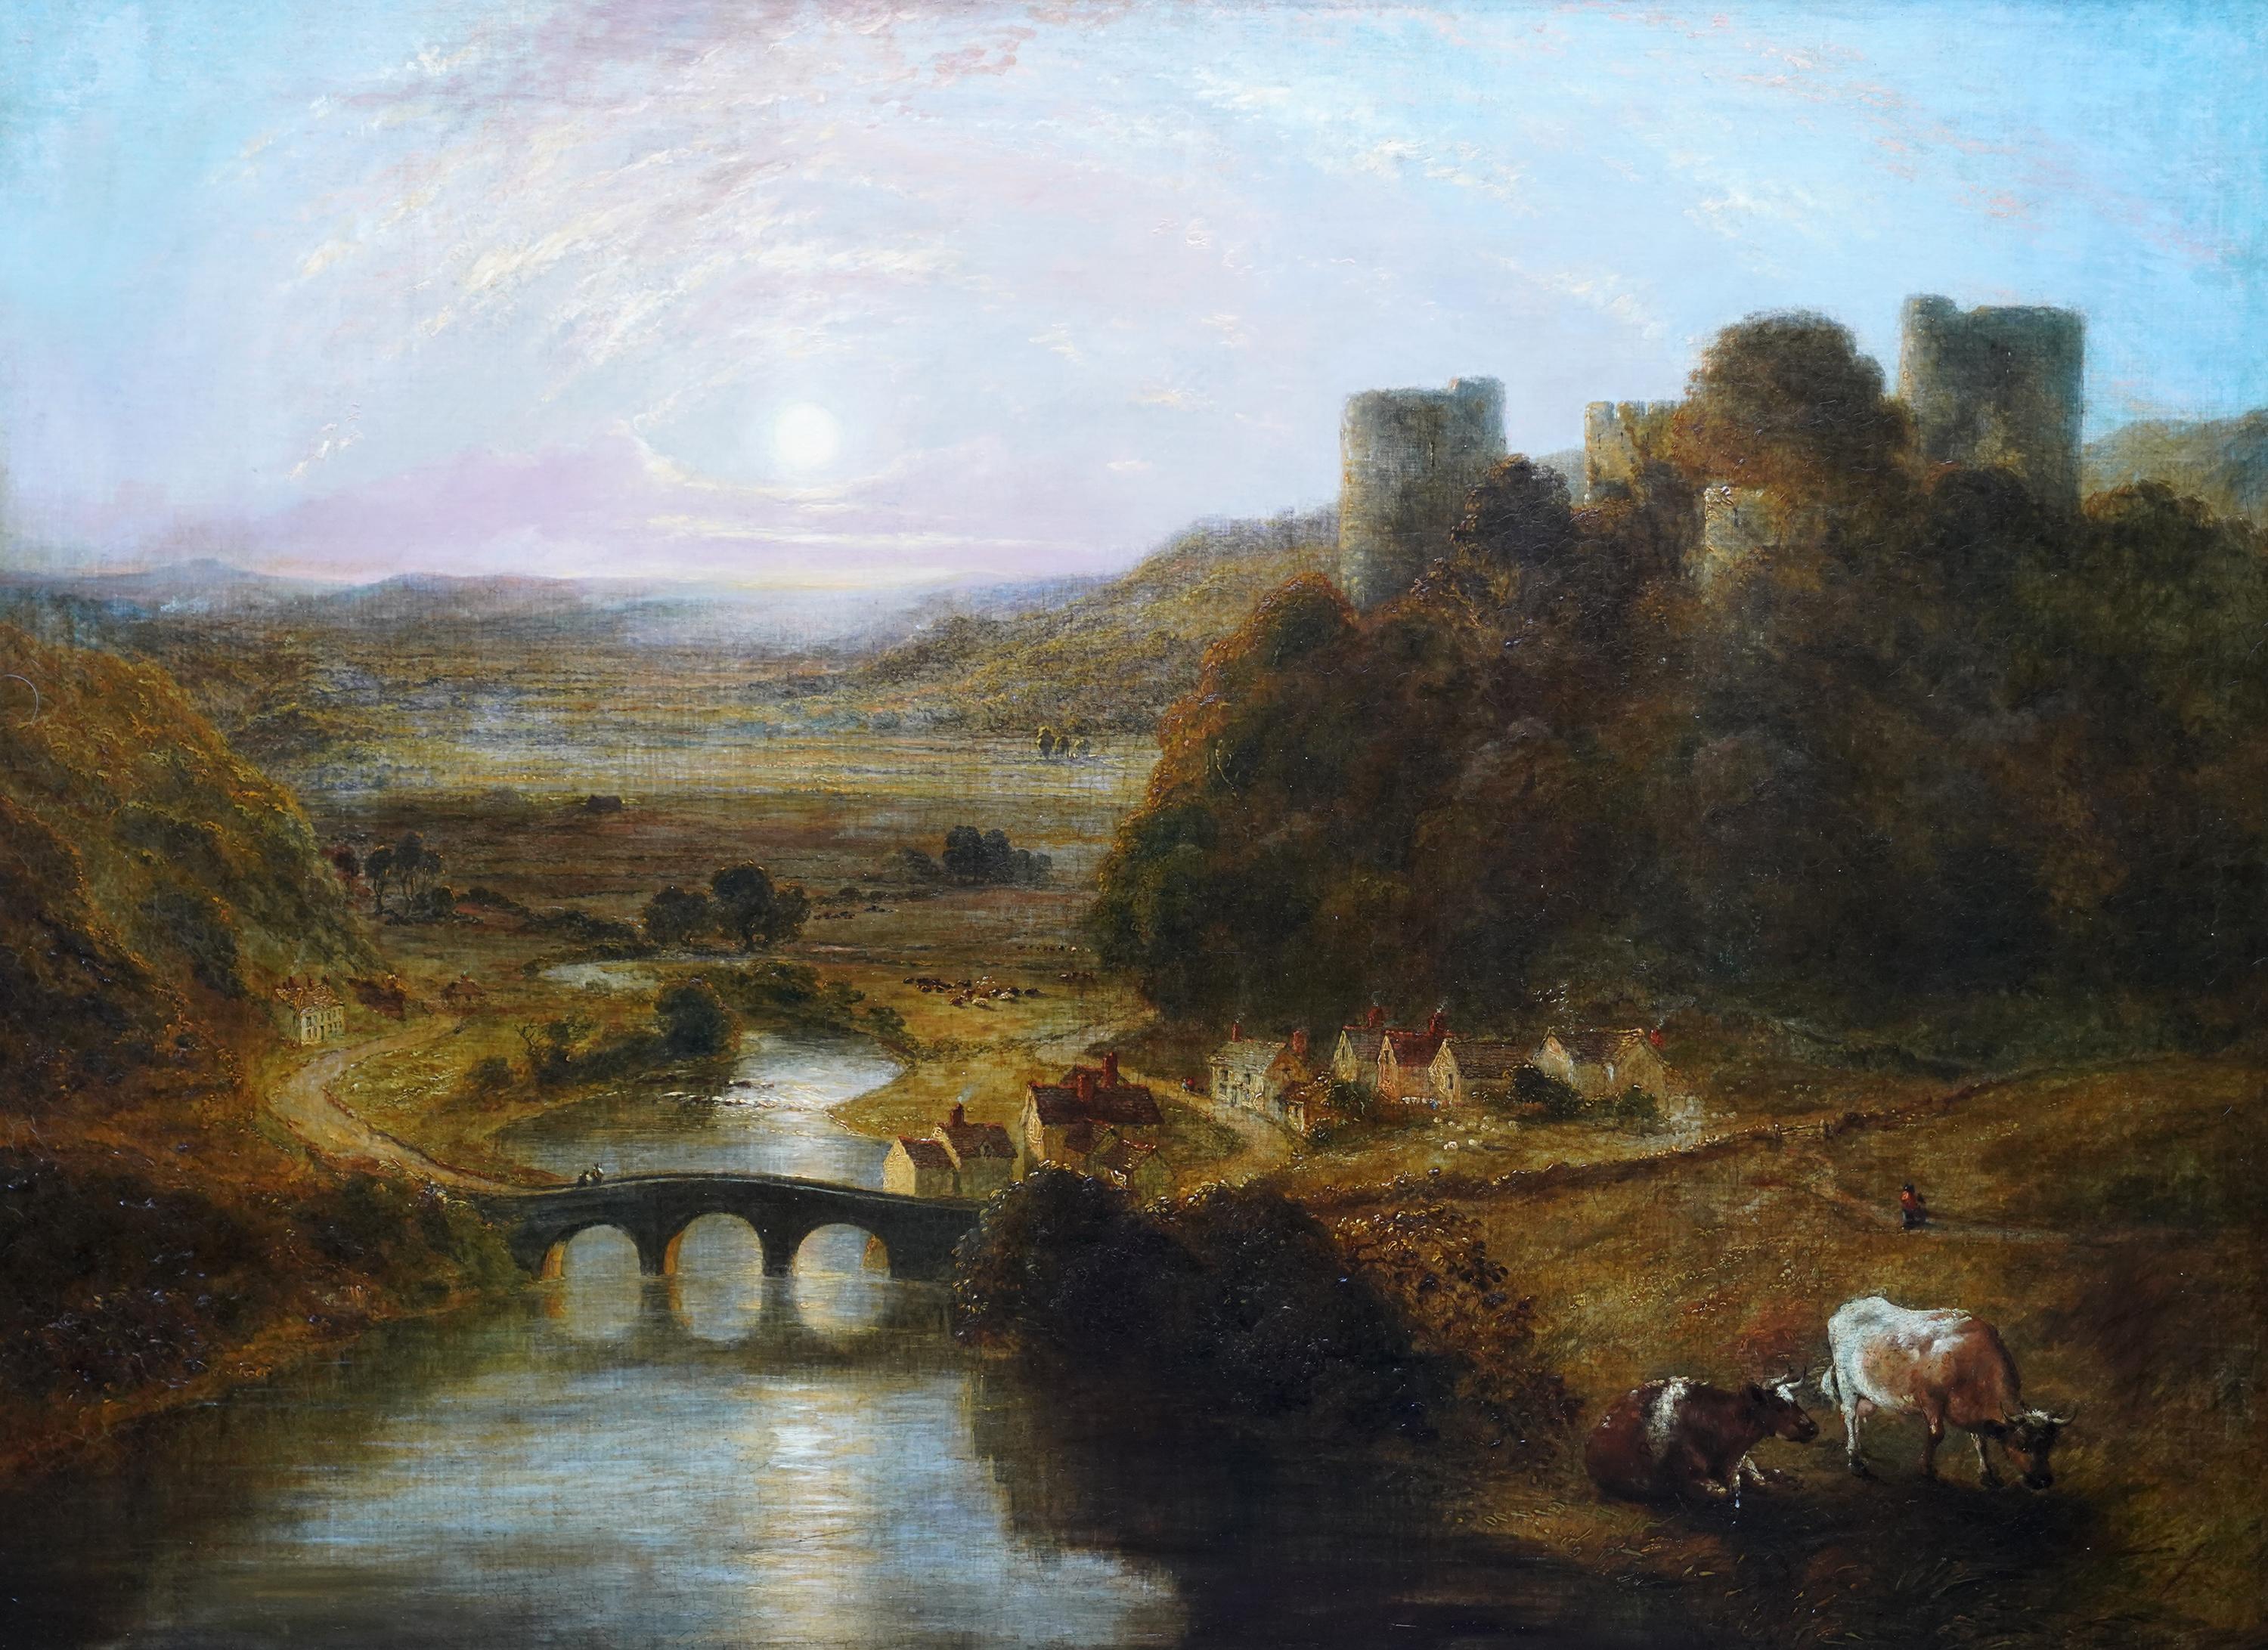 Castle and River Landscape - British 19thC art oil painting follower of Turner For Sale 8